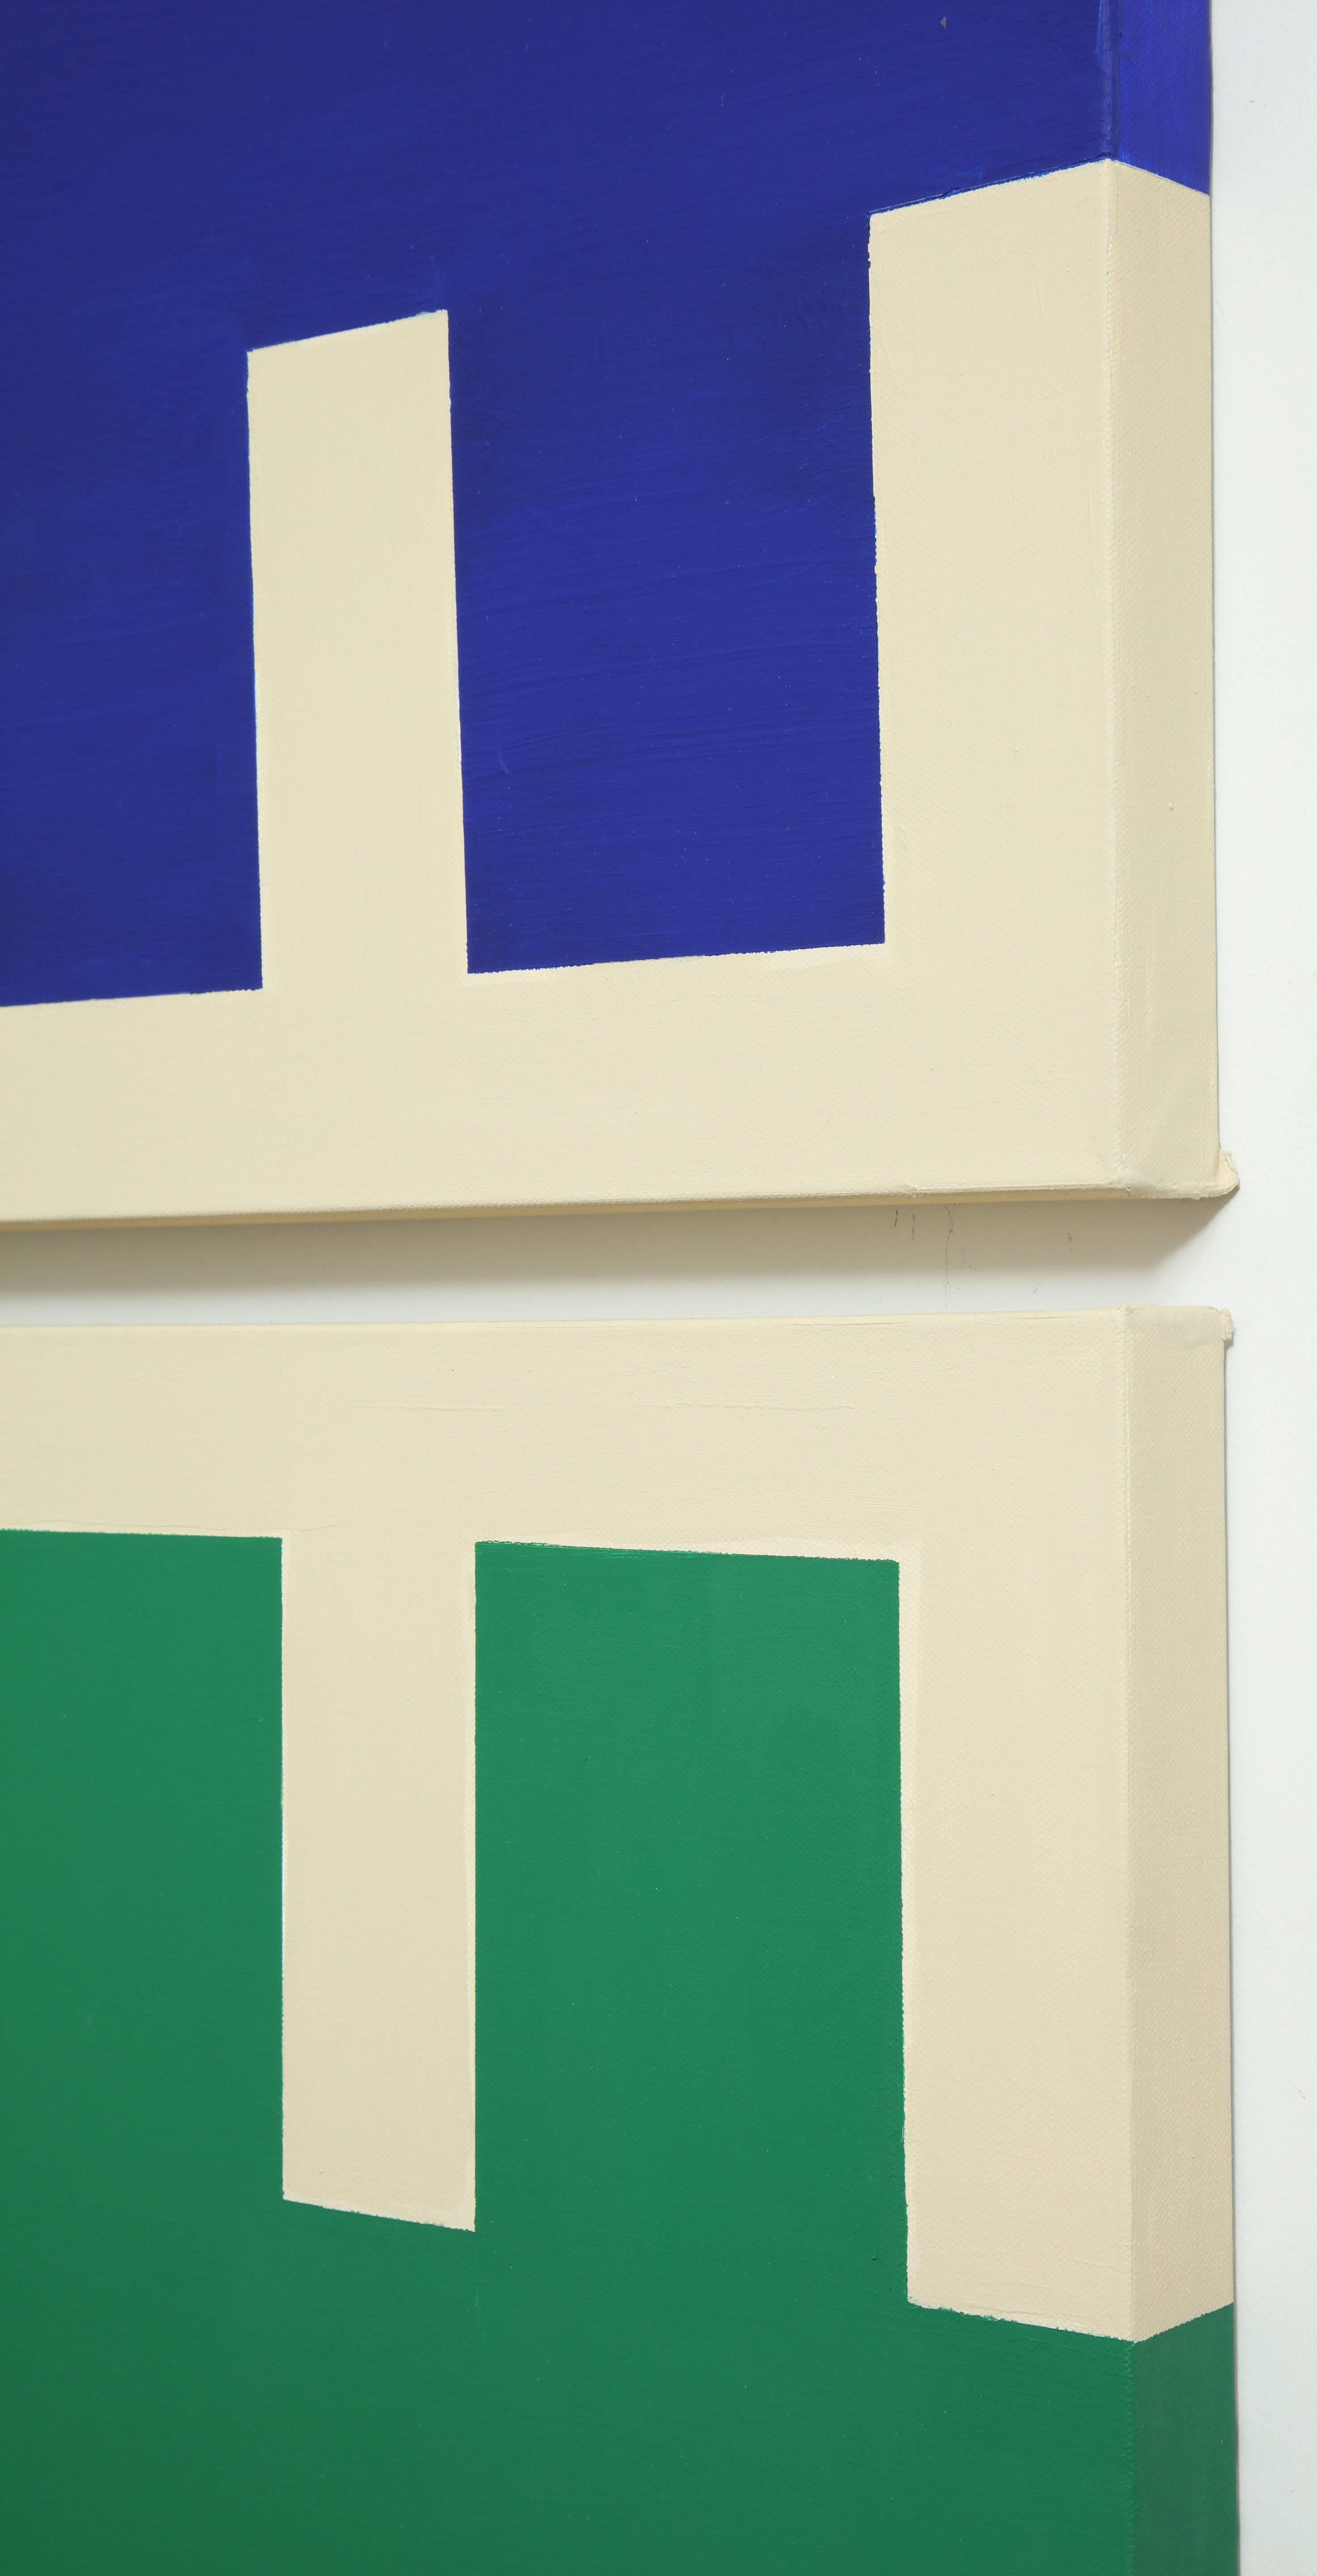 Diptych Abstract Geometric Painting  Blue, Green and Cream